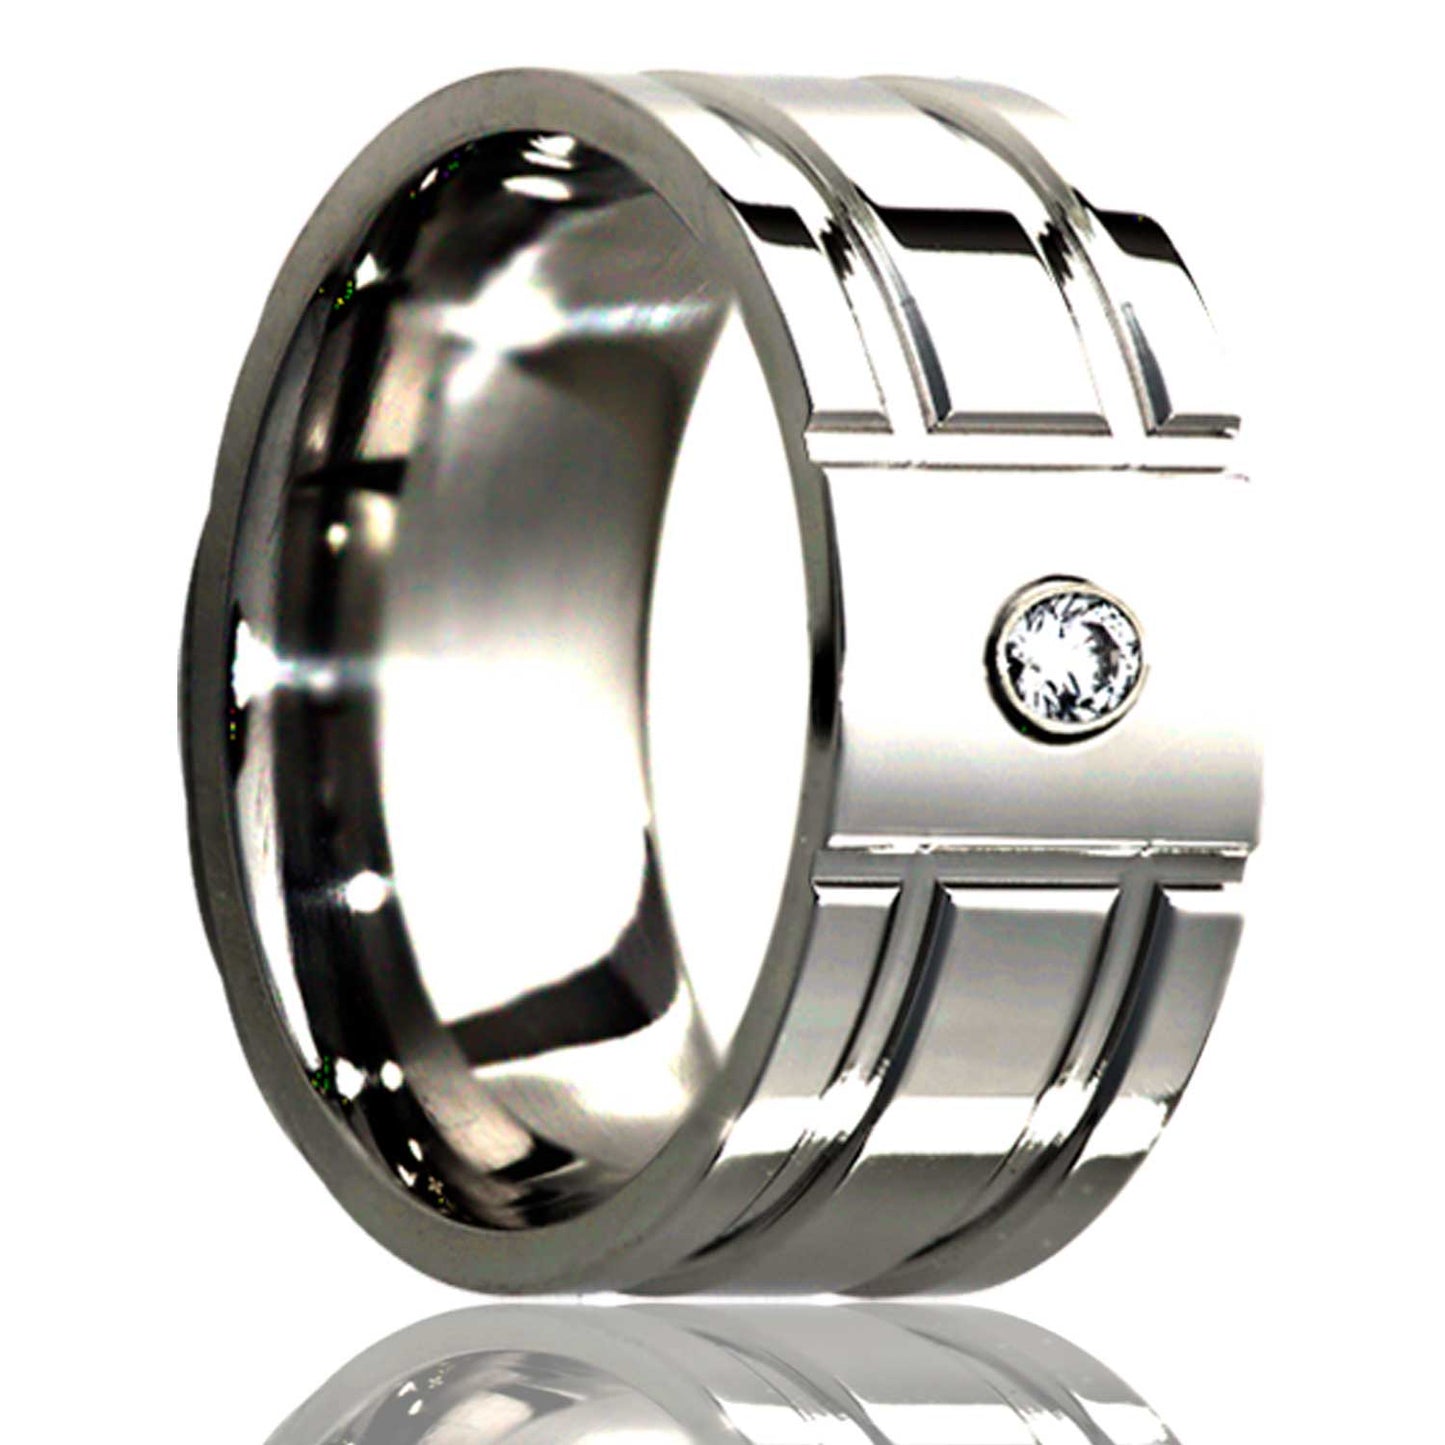 A grooved cobalt men's wedding band with diamond displayed on a neutral white background.